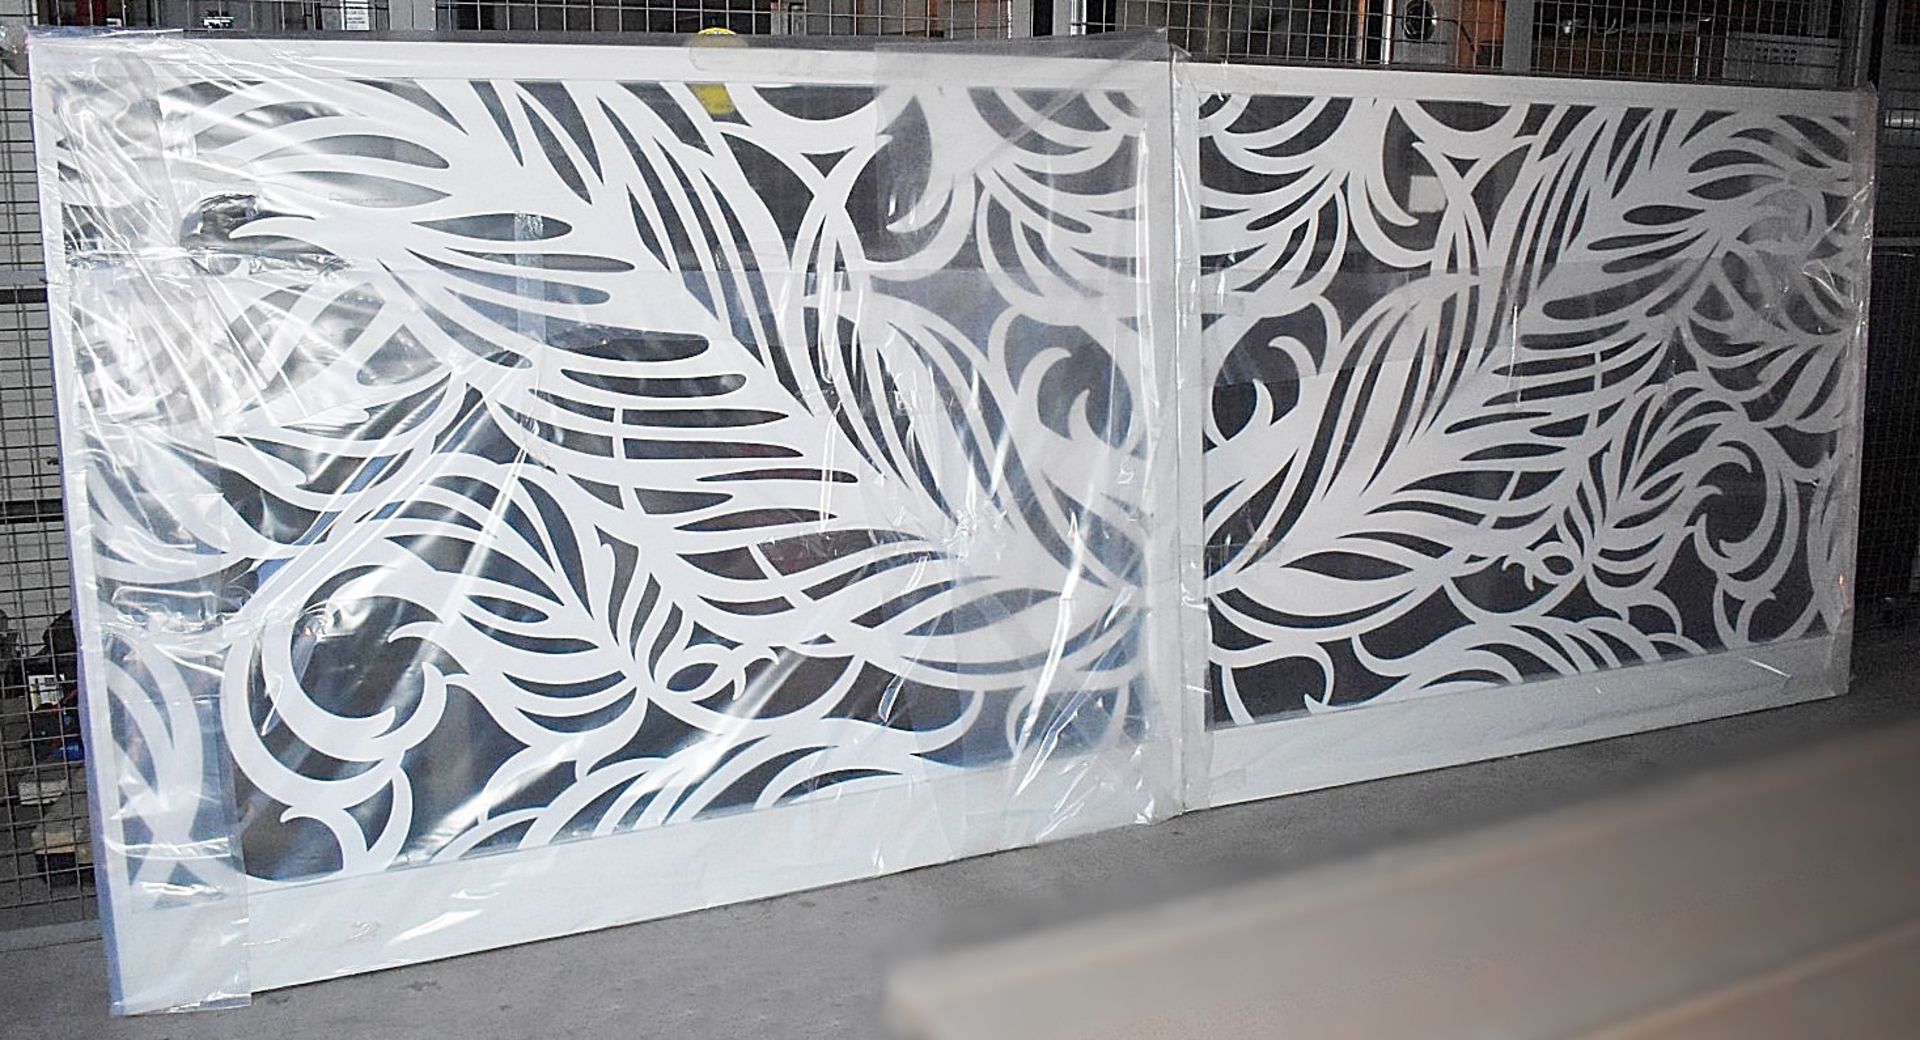 A Pair Of Elegant 'Miles and Lincoln' Framed Laser Cut Metal Room Divider Panels In A Feather Design - Image 3 of 3